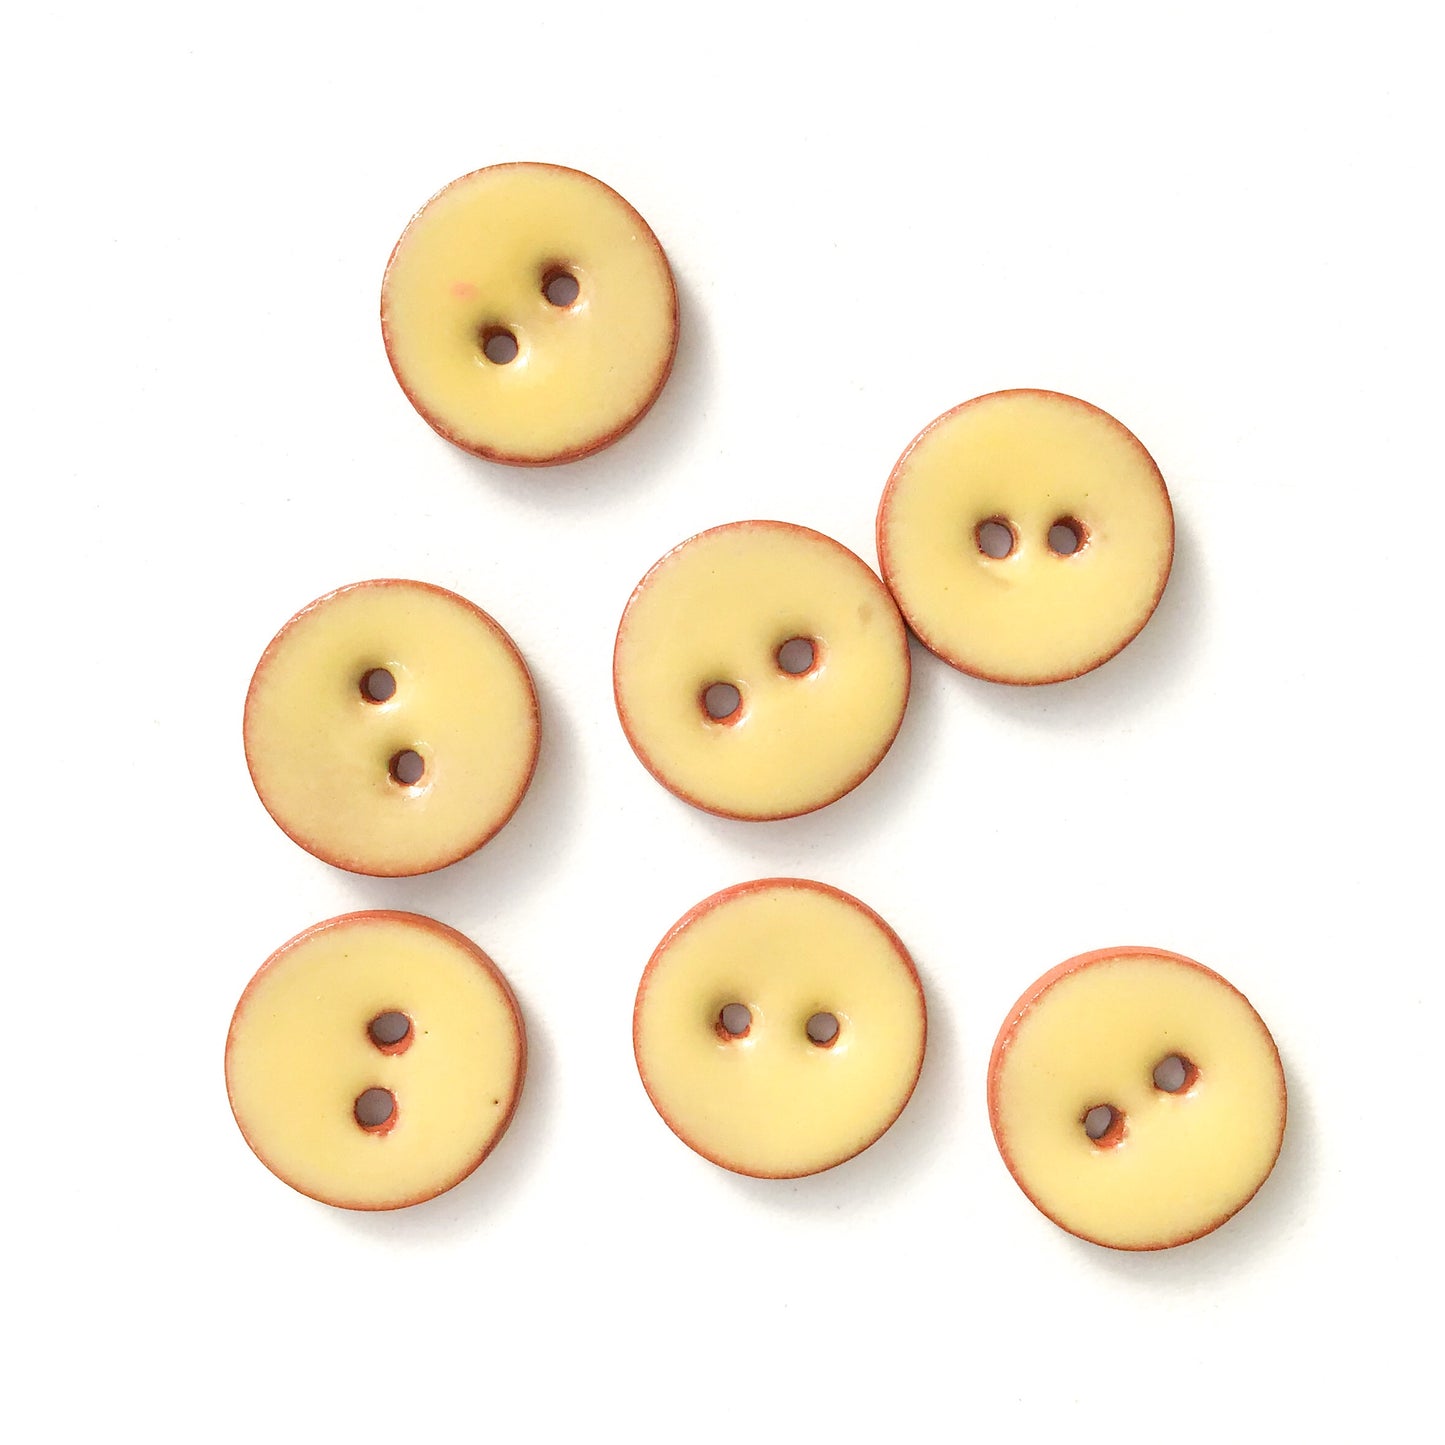 Creamy Yellow Ceramic Buttons - Clay Buttons - 5/8" - 7 Pack (ws-59)